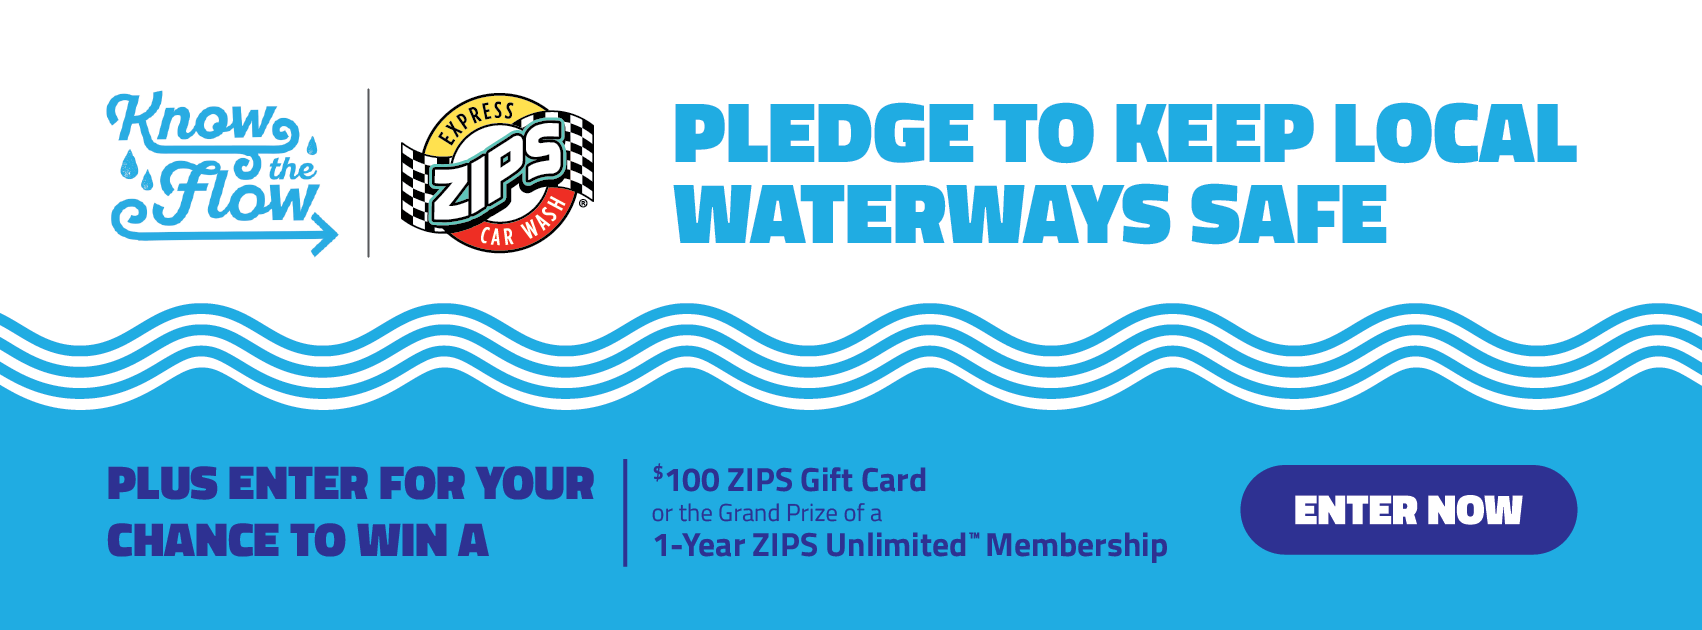 Banner that invites the reader to pledge to keep water clean and enter to win car wash campaign by following link to take a pledge